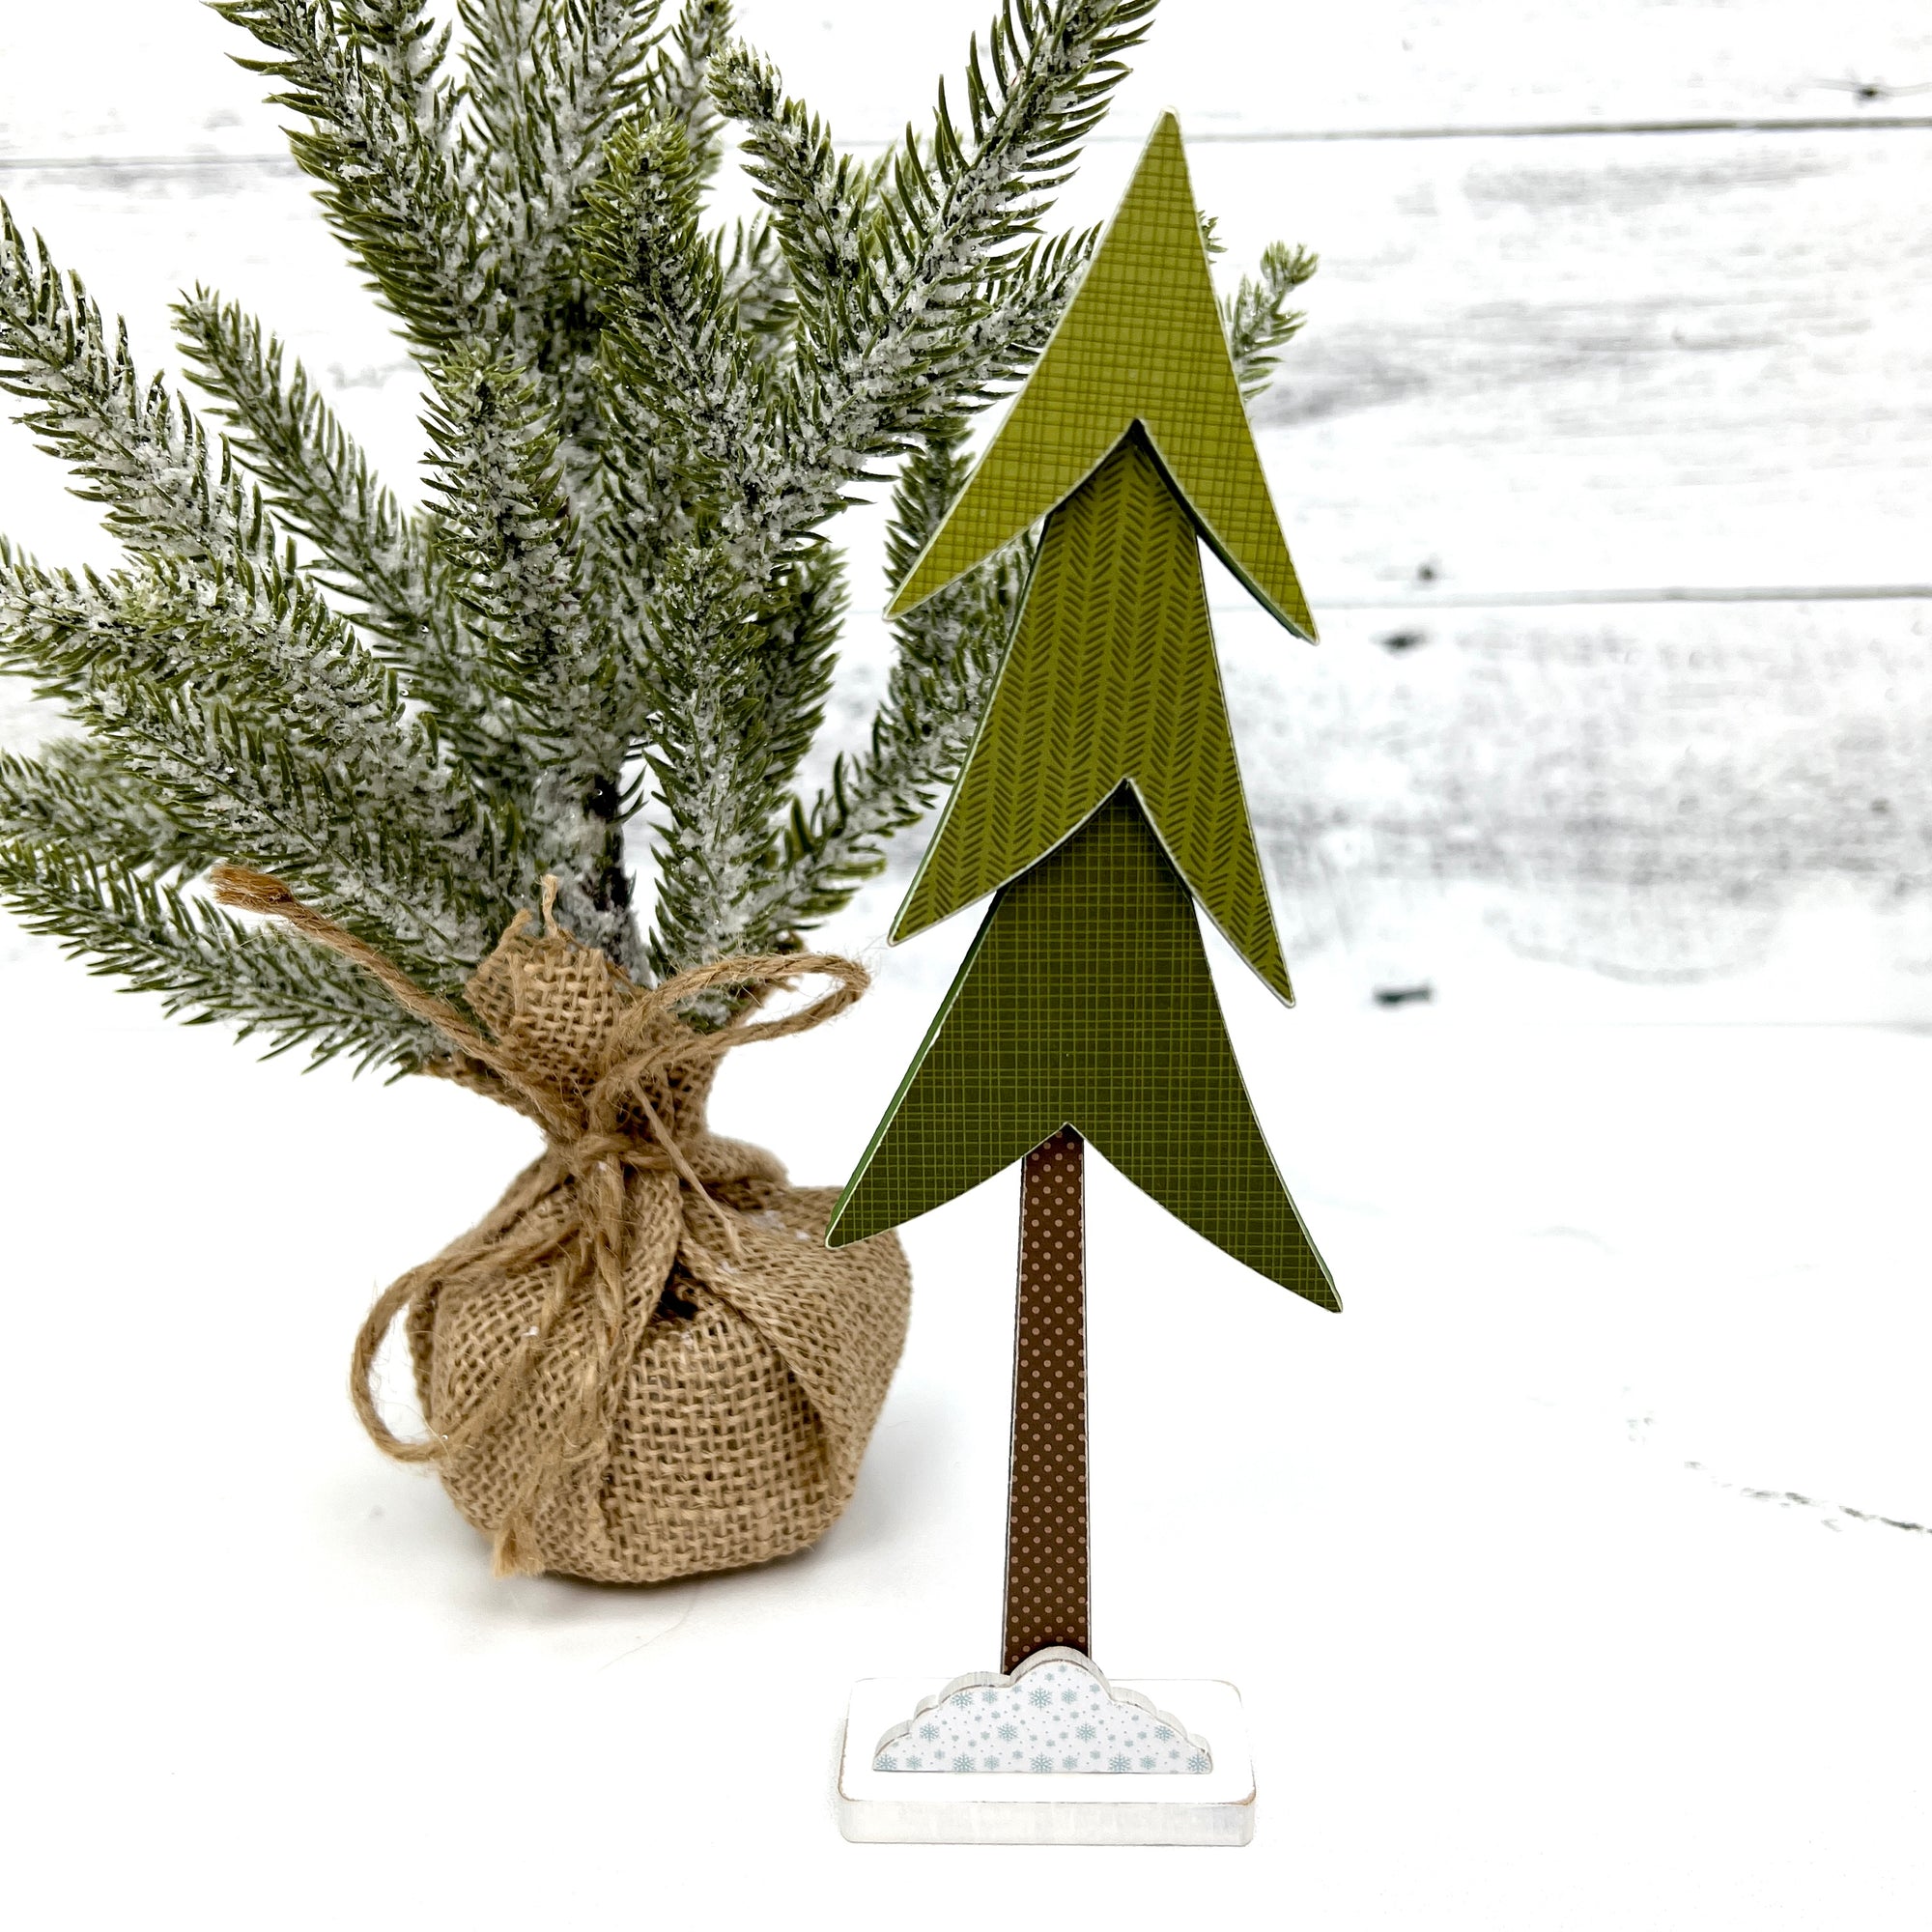 Winter pine tree wood decoration for styling trays, tiered trays and shelves